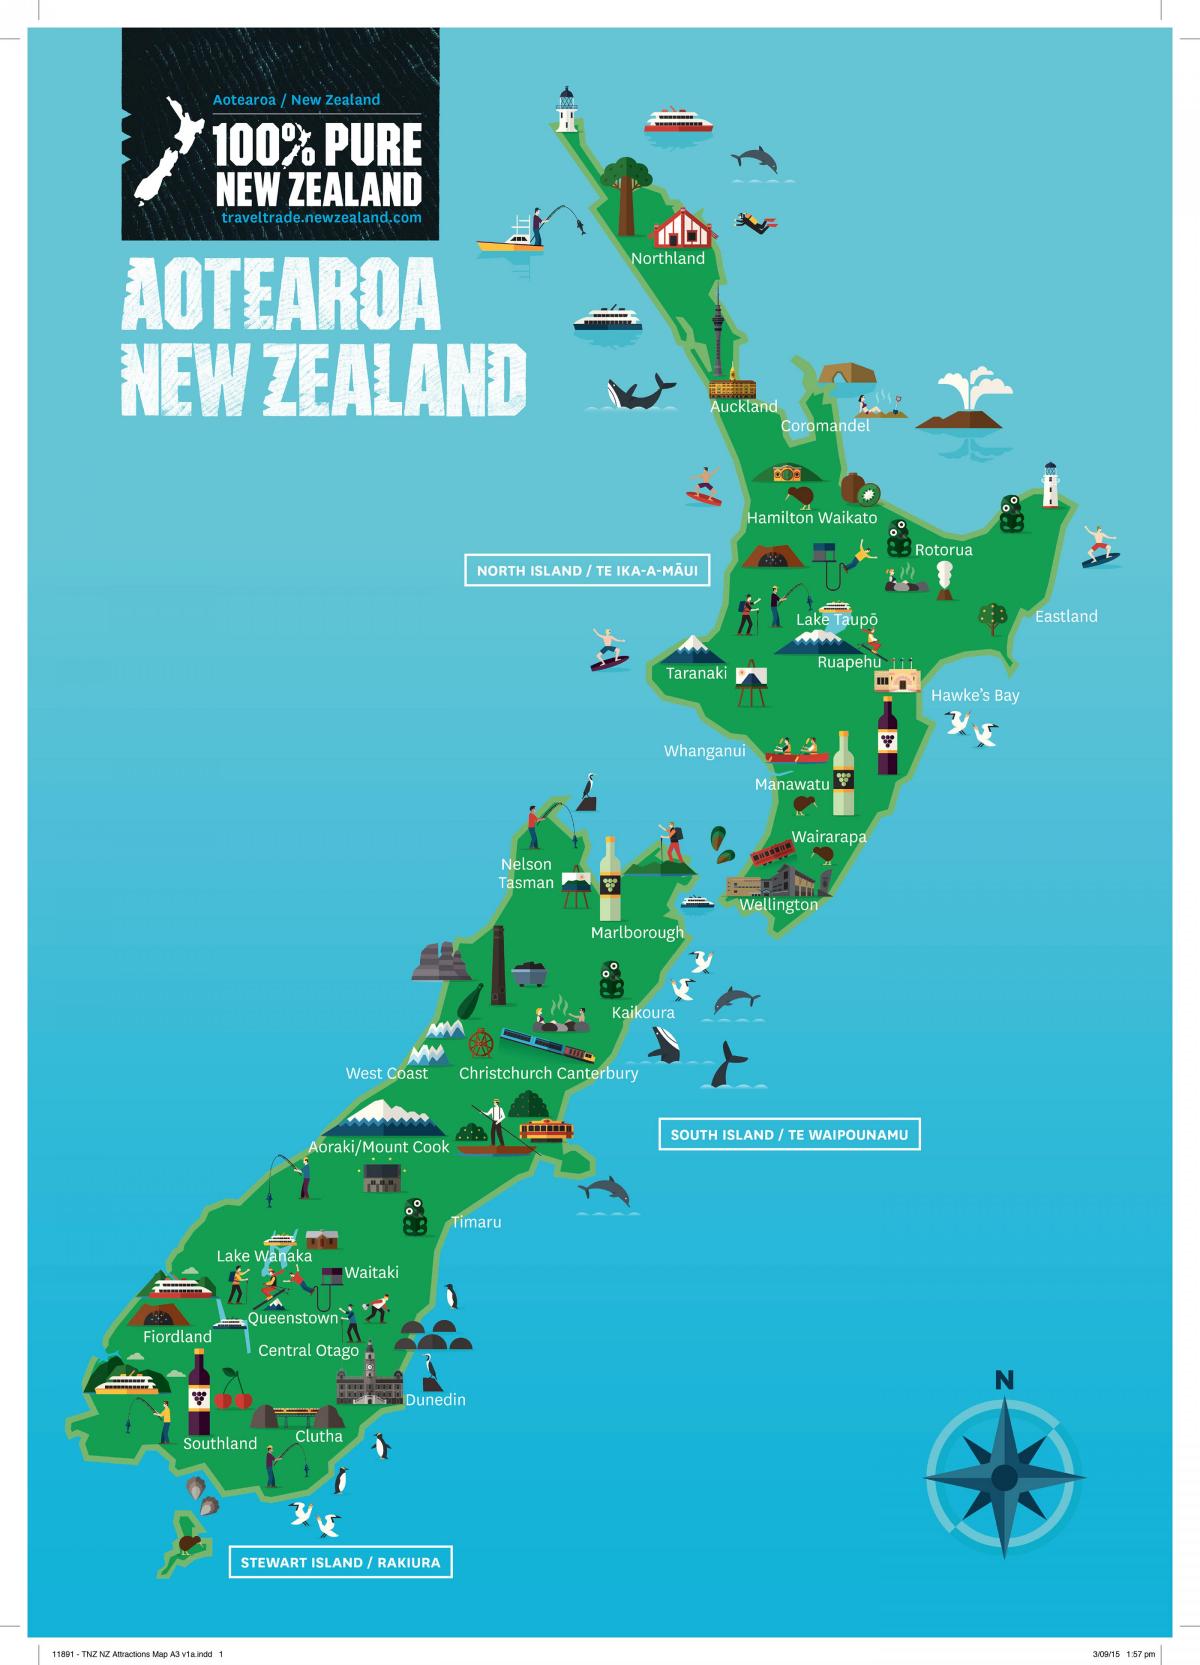 New Zealand tourist attractions map